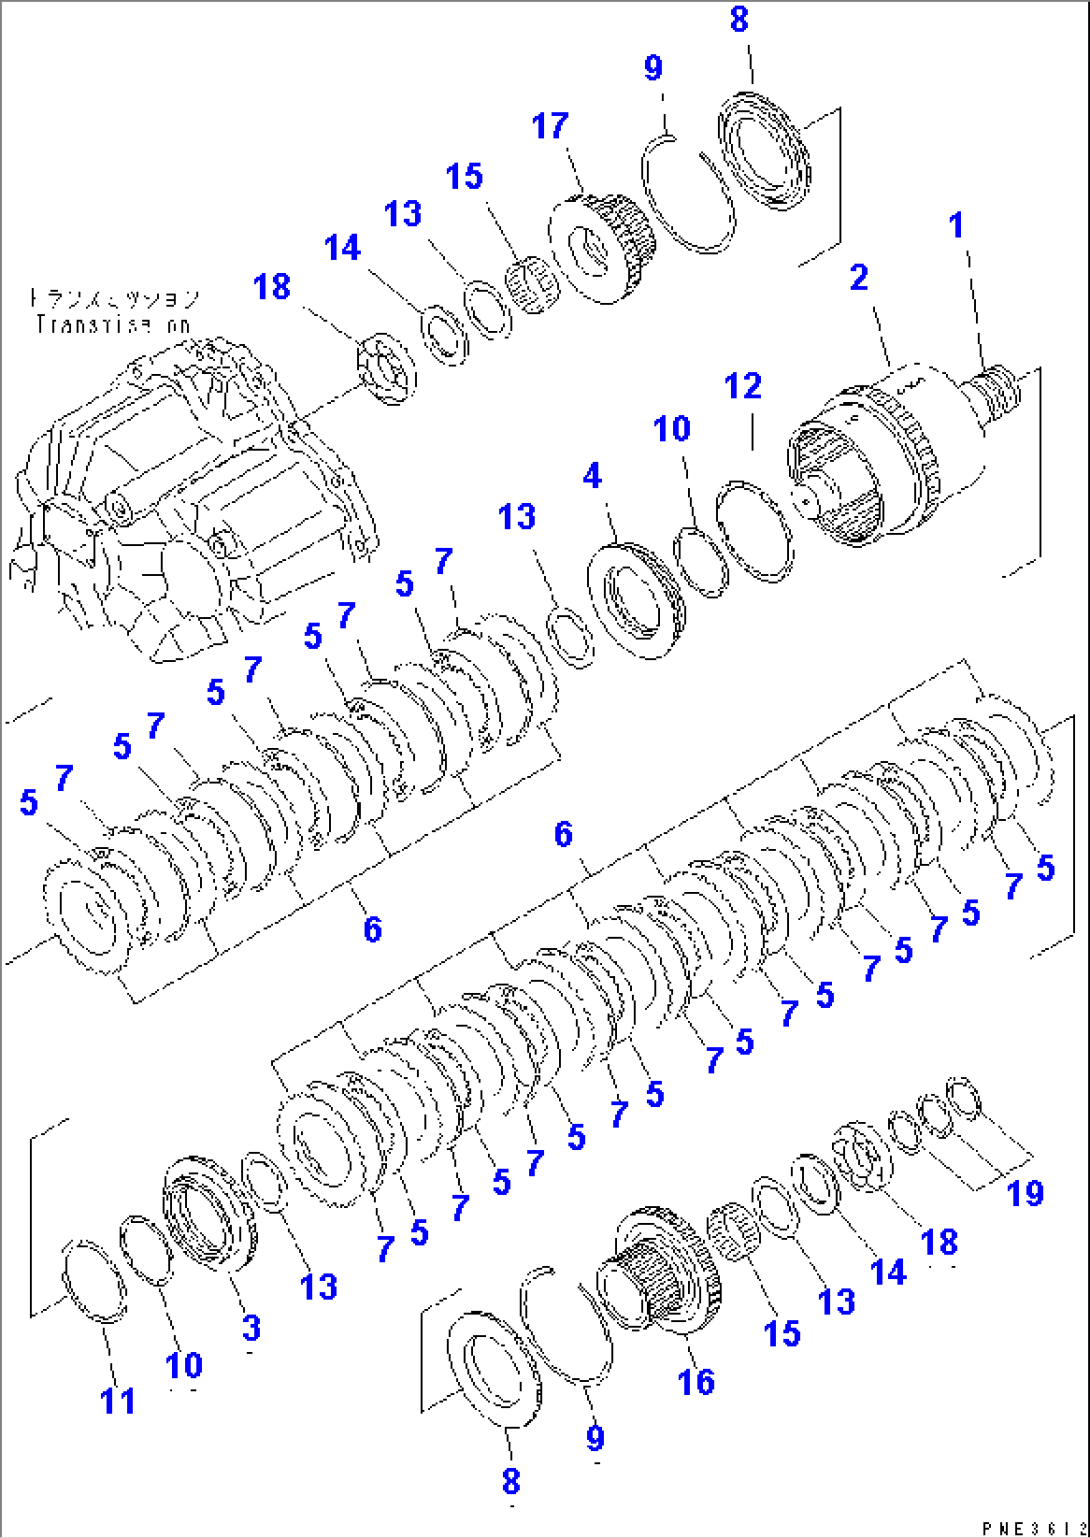 TRANSMISSION (REVERSE AND 1ST CLUTCH) (FOR 4-SPEED)